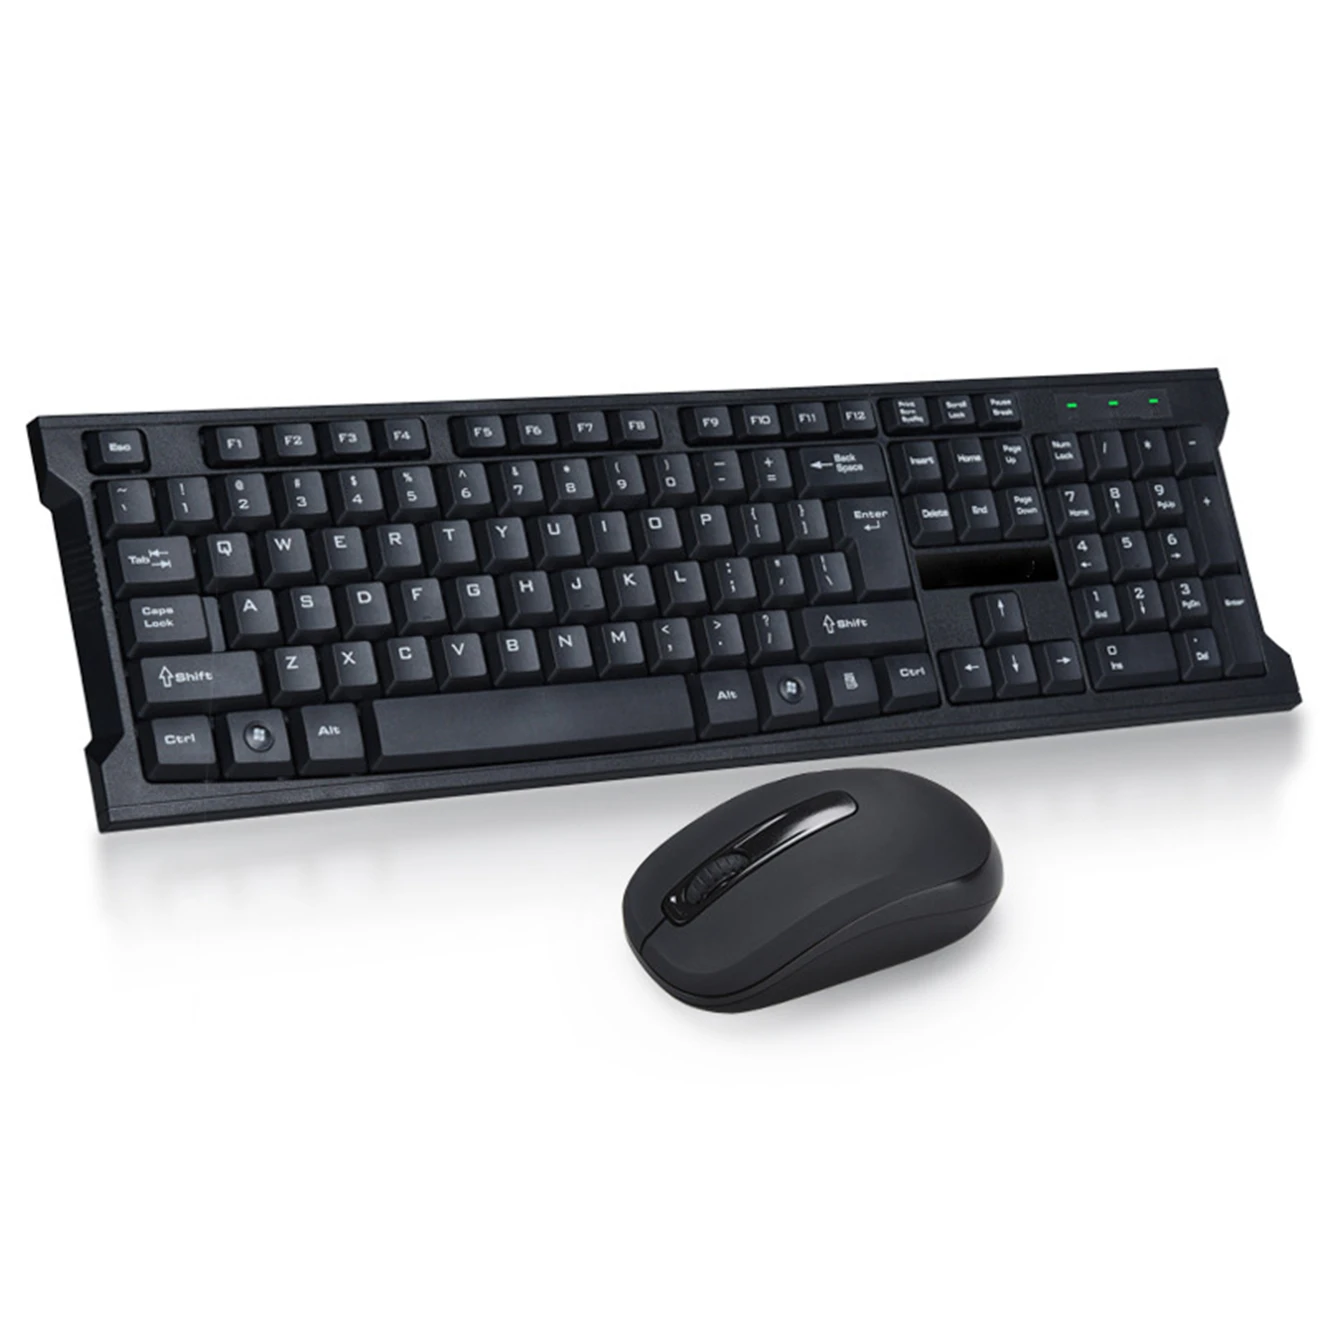 Wireless keyboard and mouse combo with simple appearance and power saving fit for bedroom living room office use